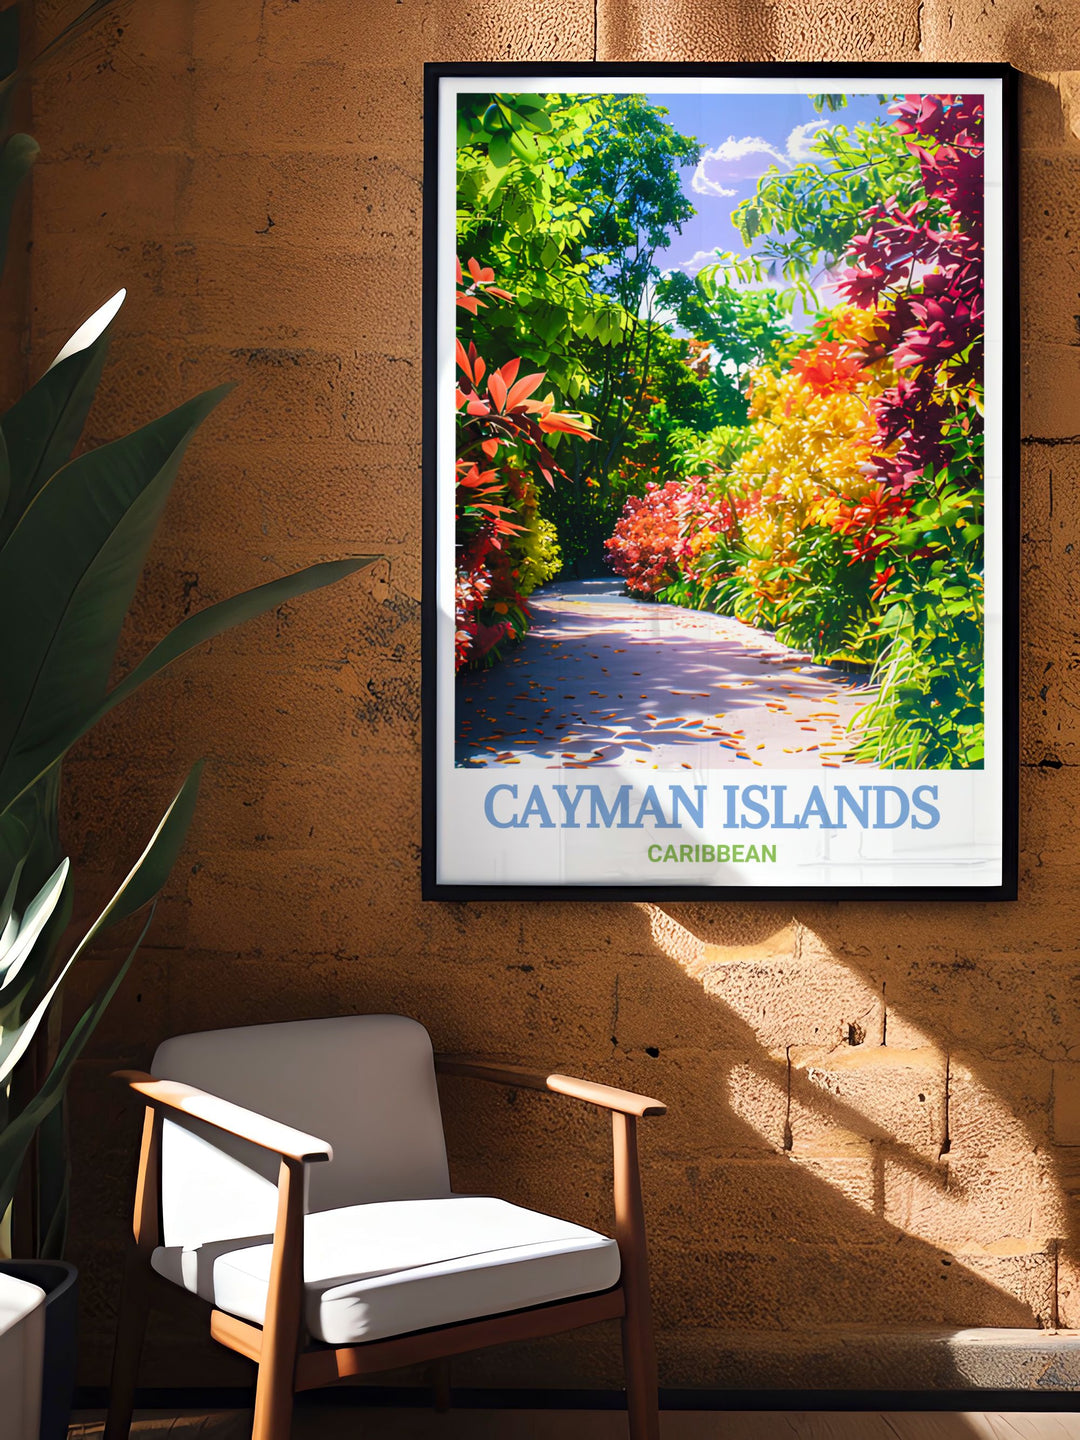 Captivating Queen Elizabeth II Botanic Park poster highlighting the scenic landscapes of the Cayman Islands perfect for creating a tranquil ambiance in your living space and available as a travel poster print or personalized gift